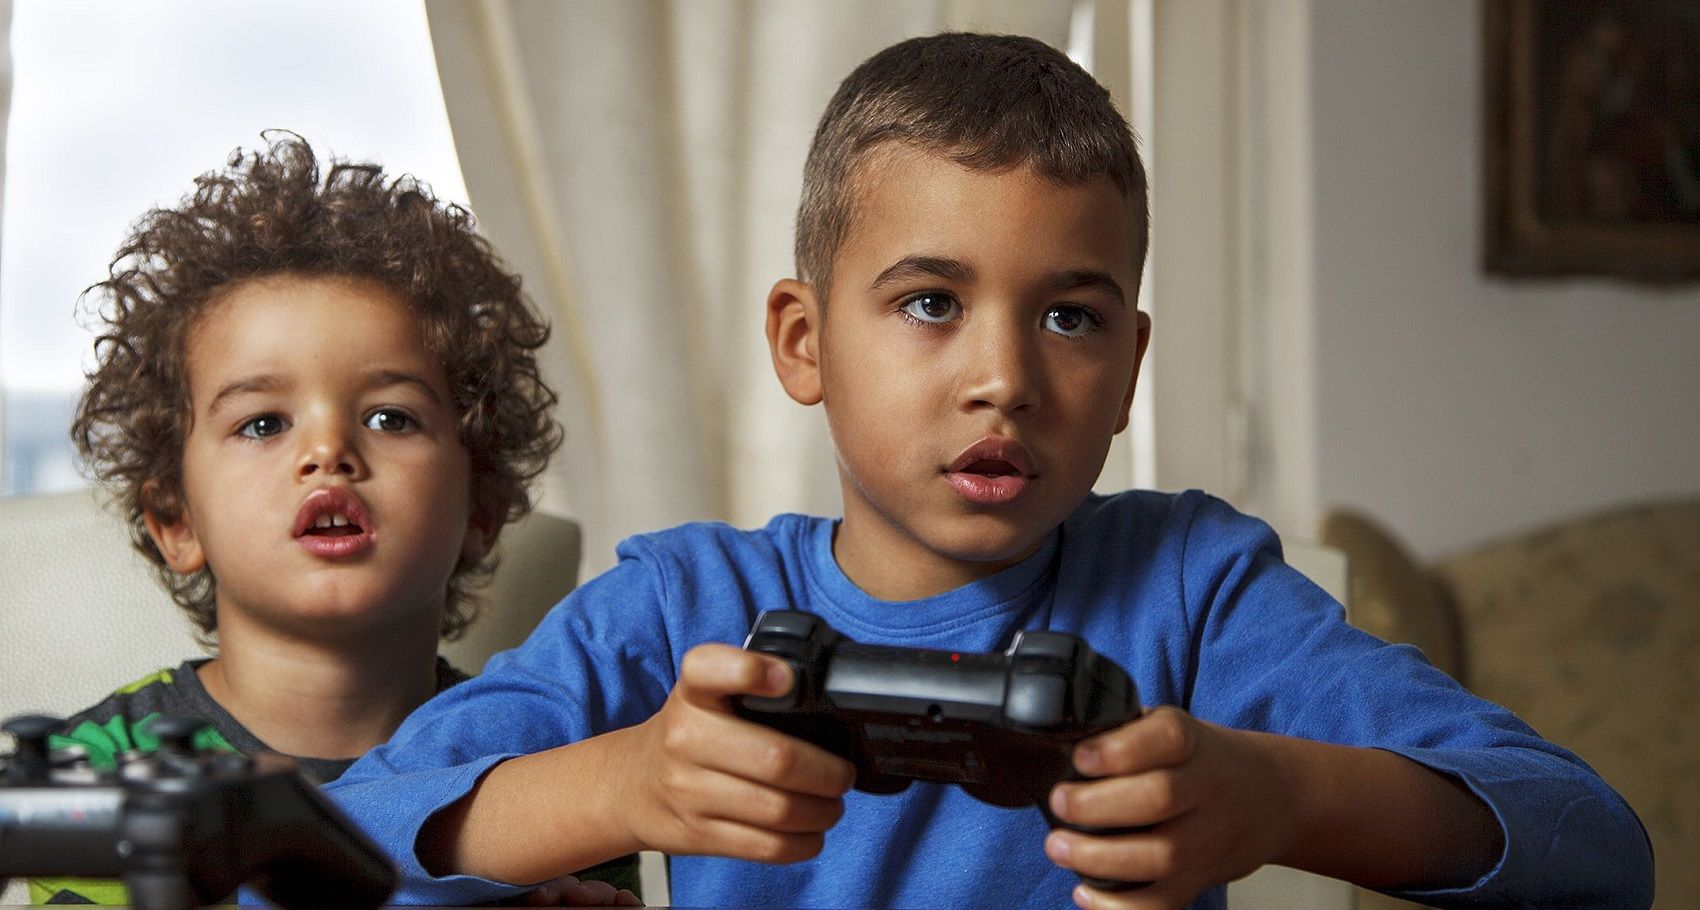 10 Kids Games That Are Way Too Hard For Children